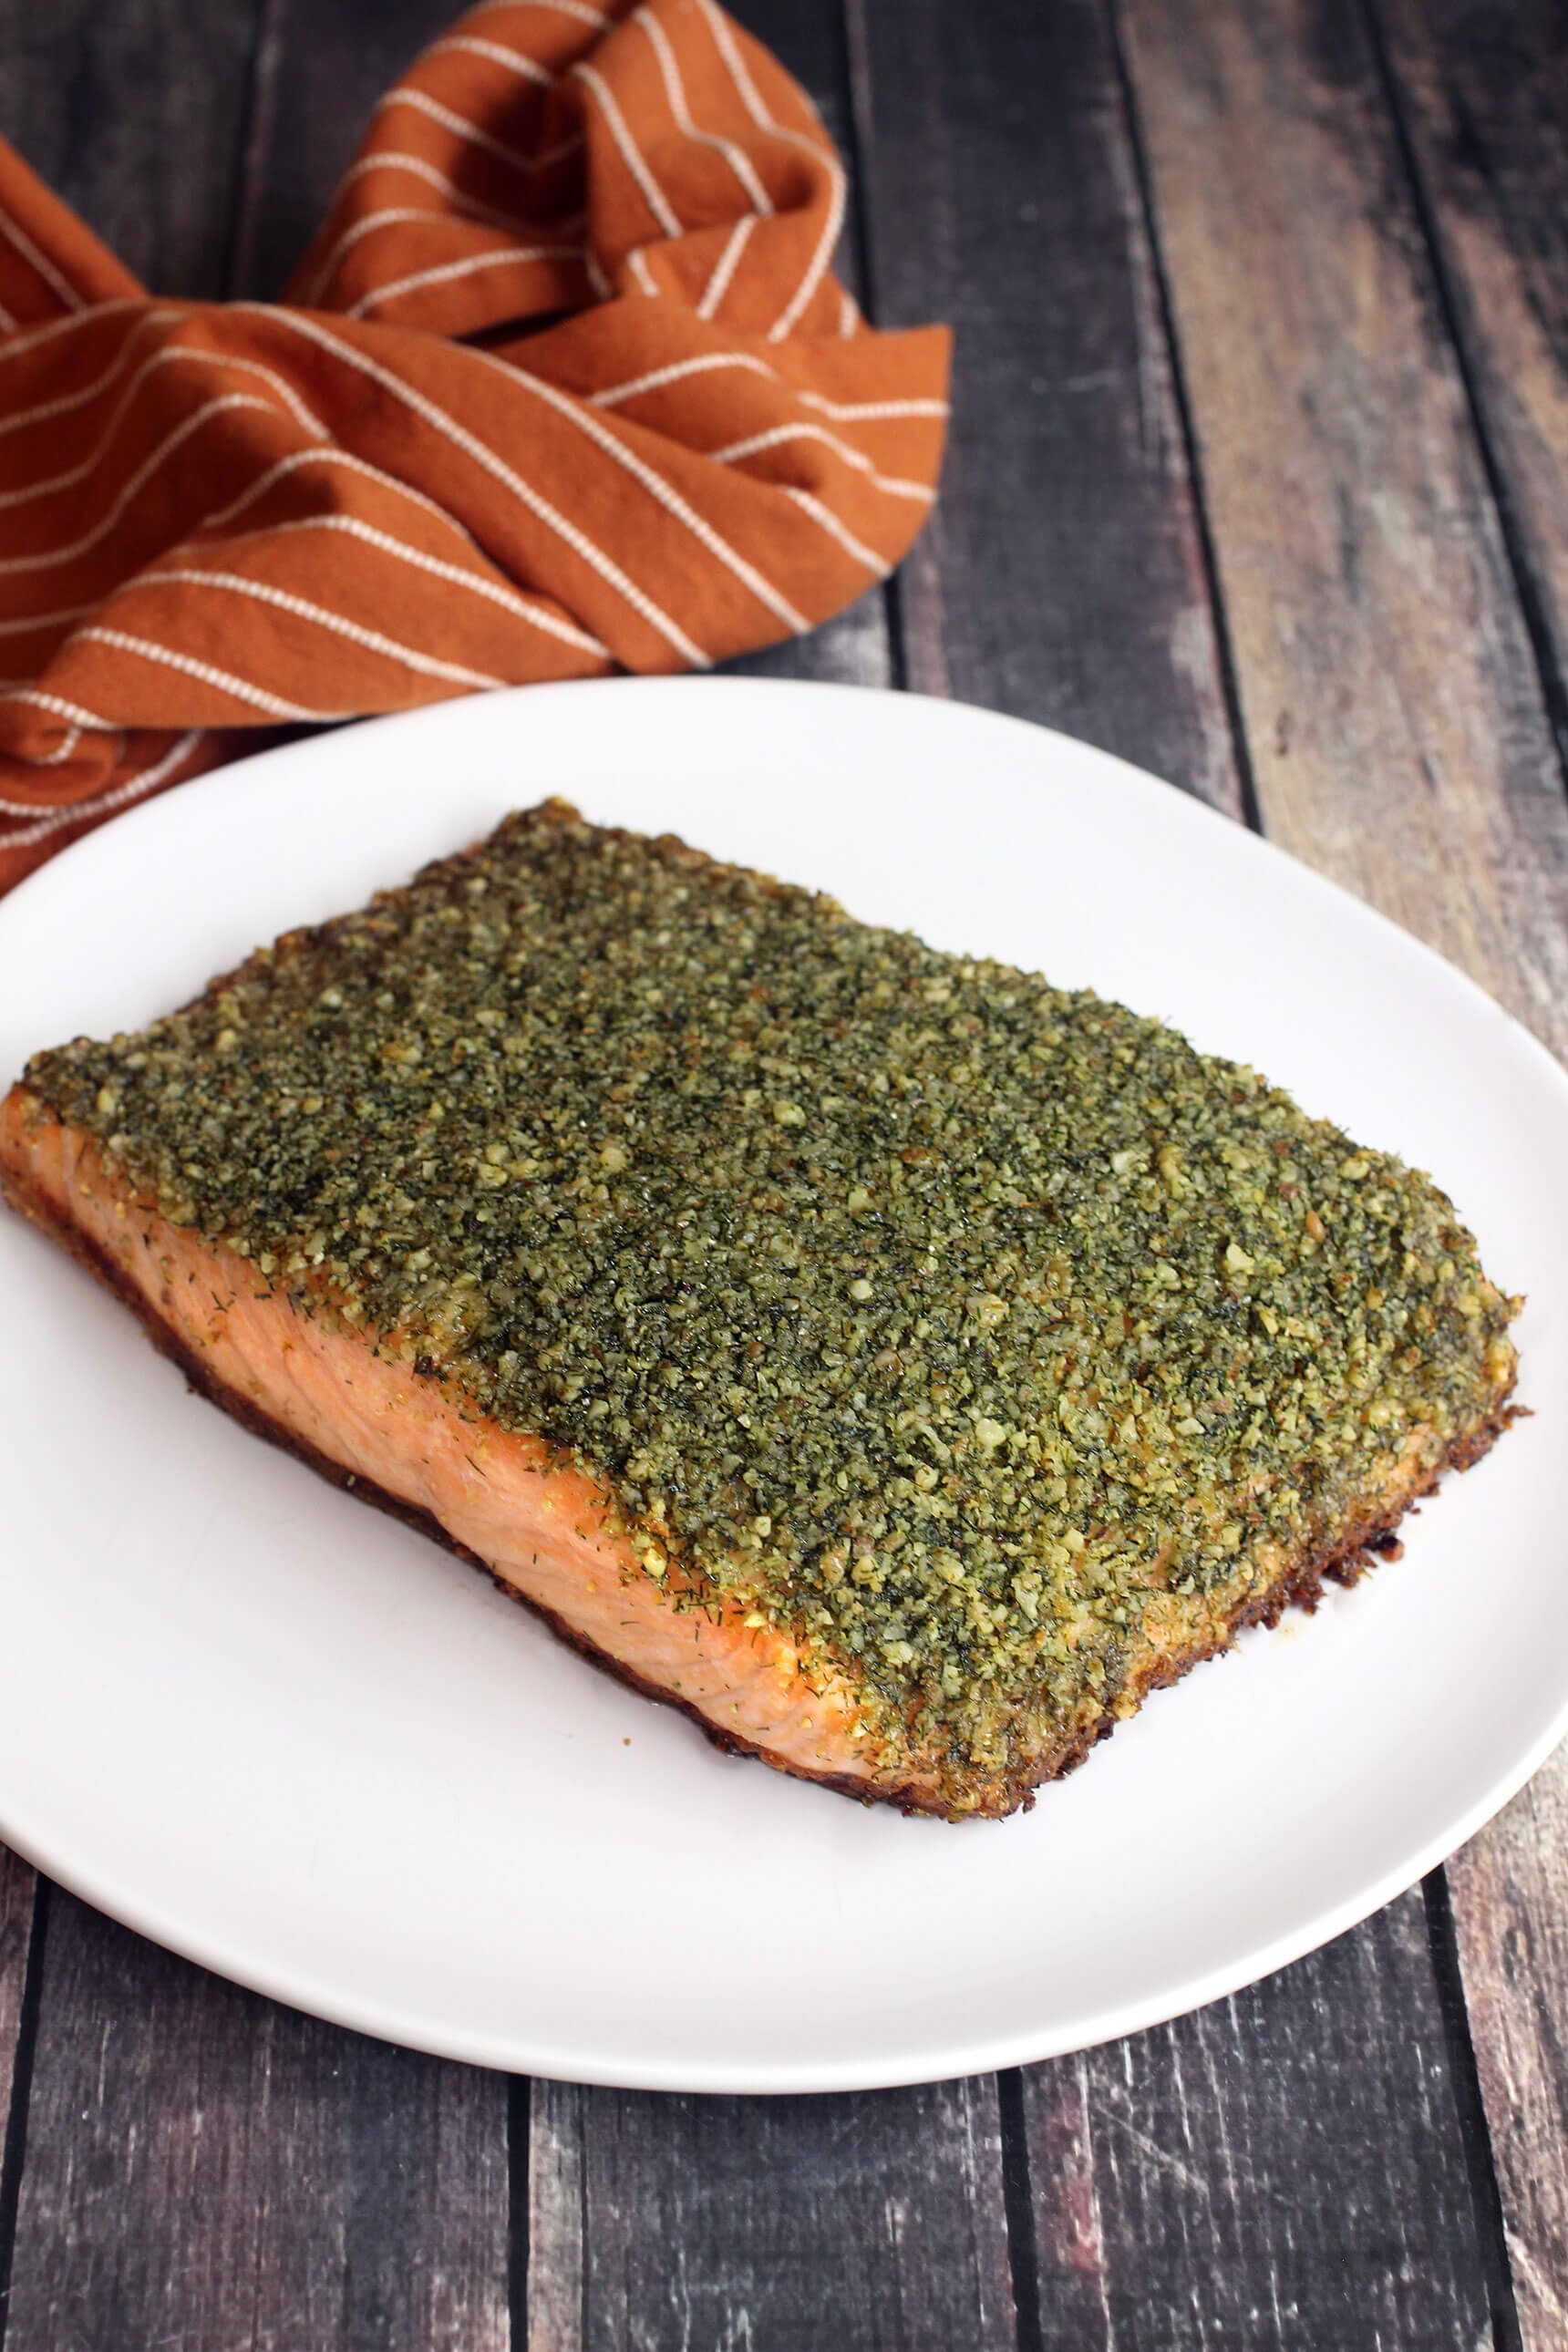 DILL WALNUT AND PARMESAN CRUSTED SALMON